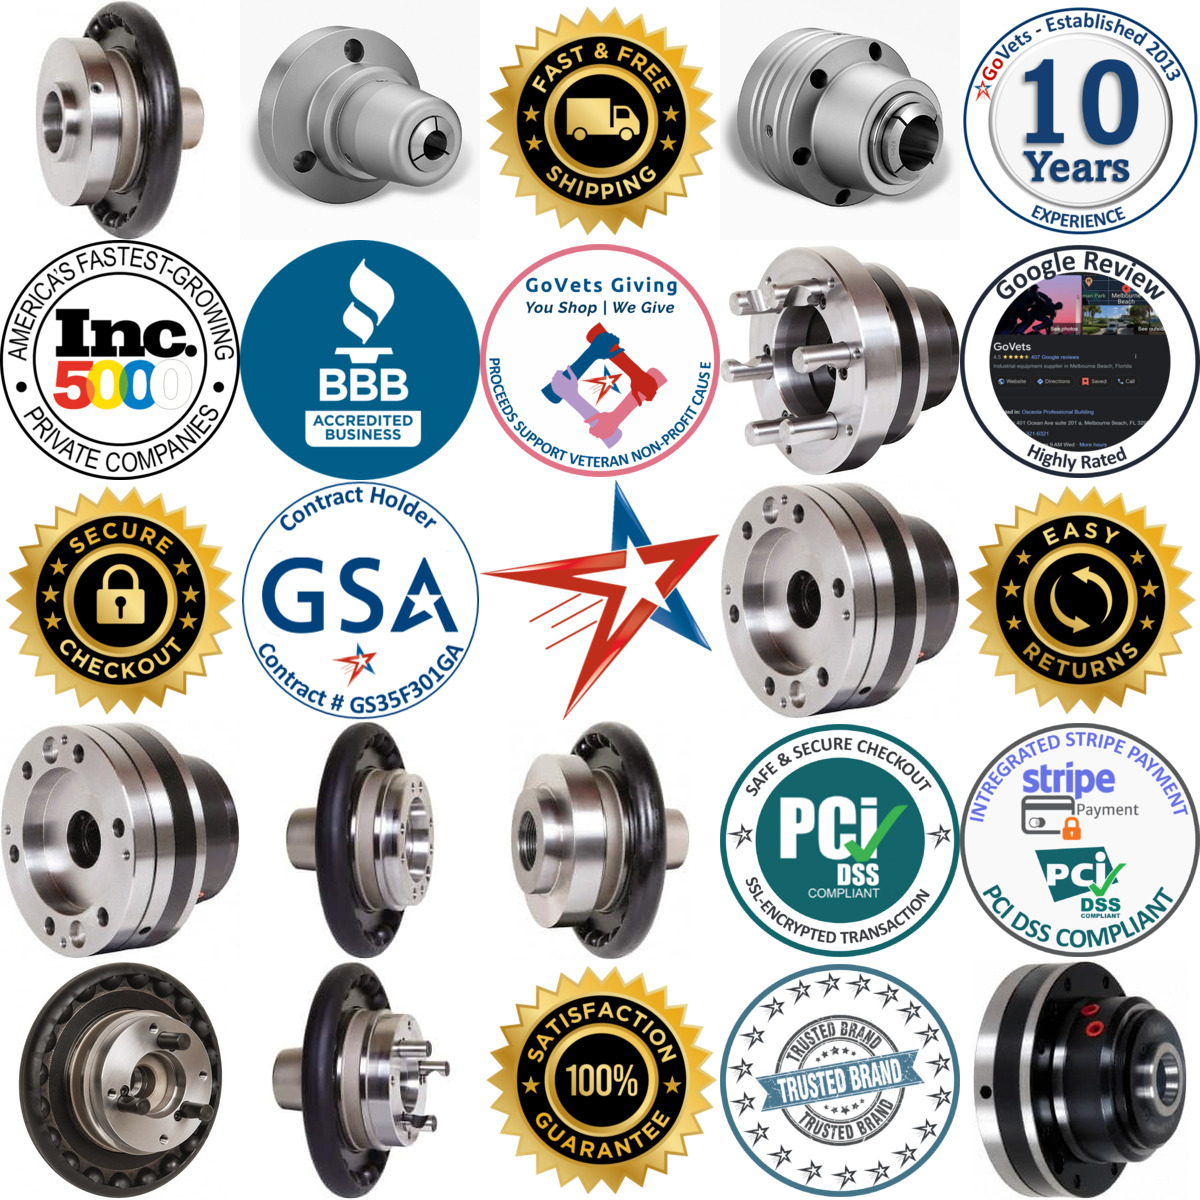 A selection of Atlas Workholding products on GoVets